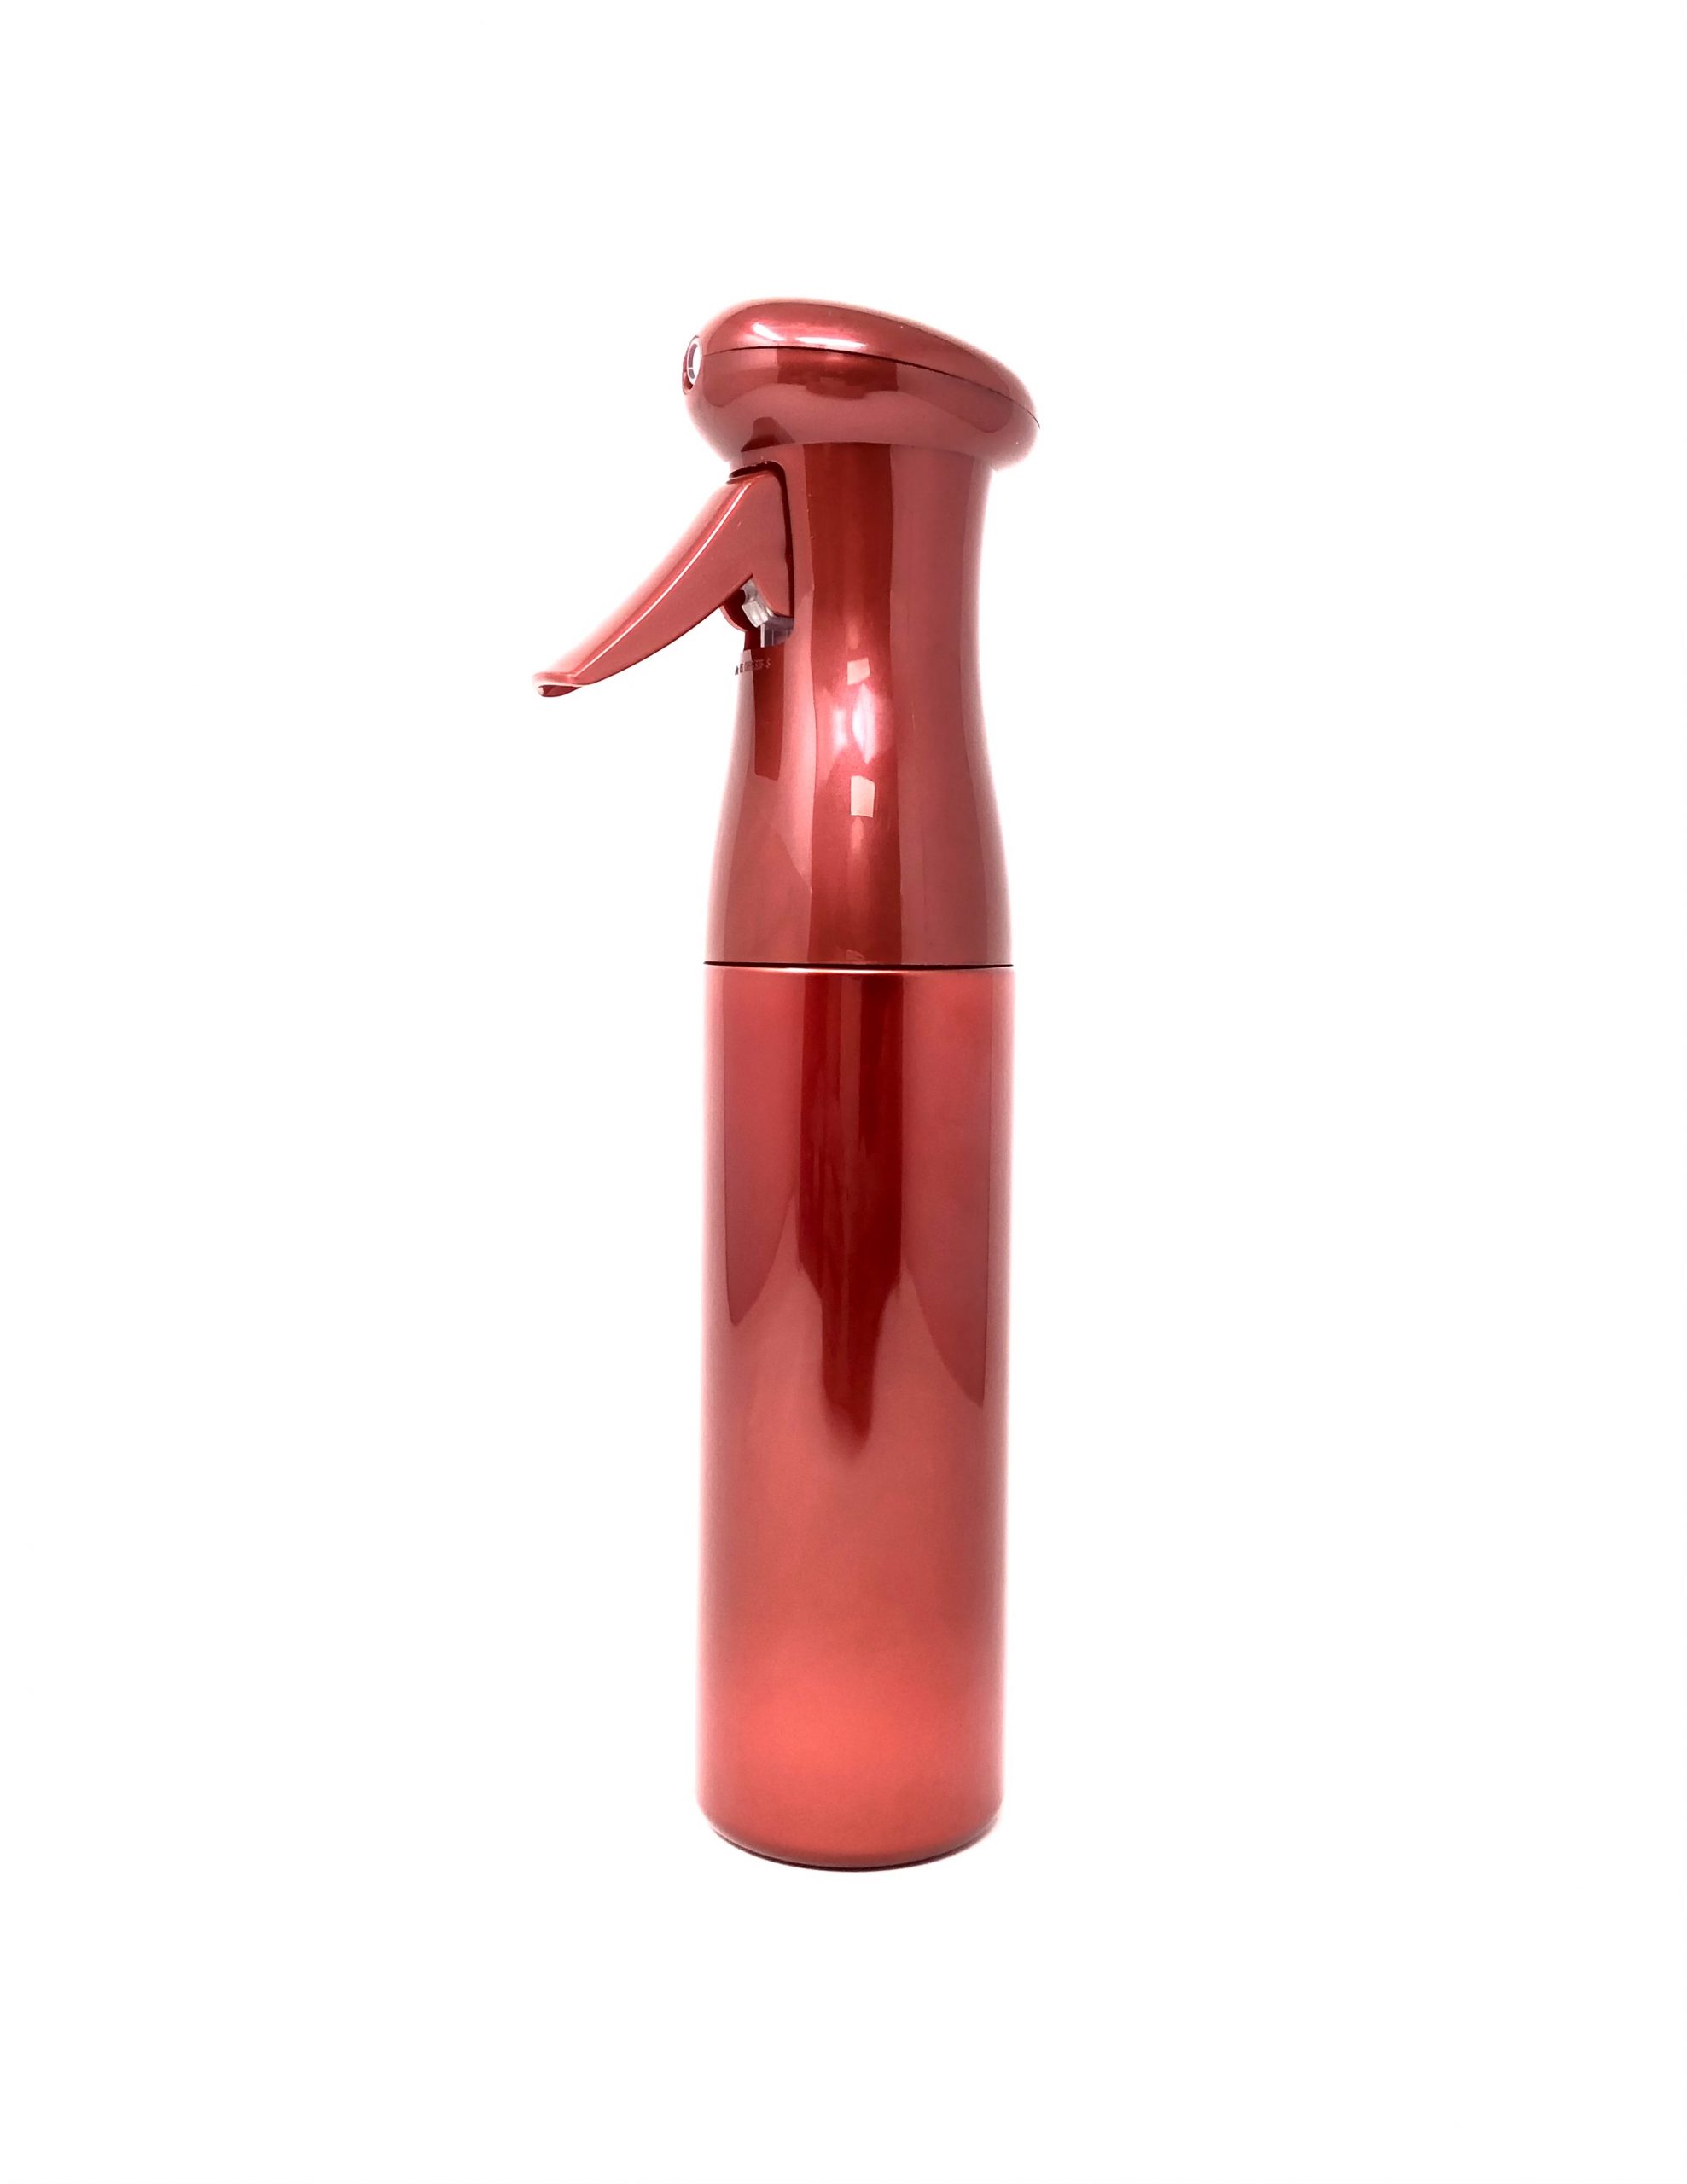 continuous spray Red mist bottle 300ml